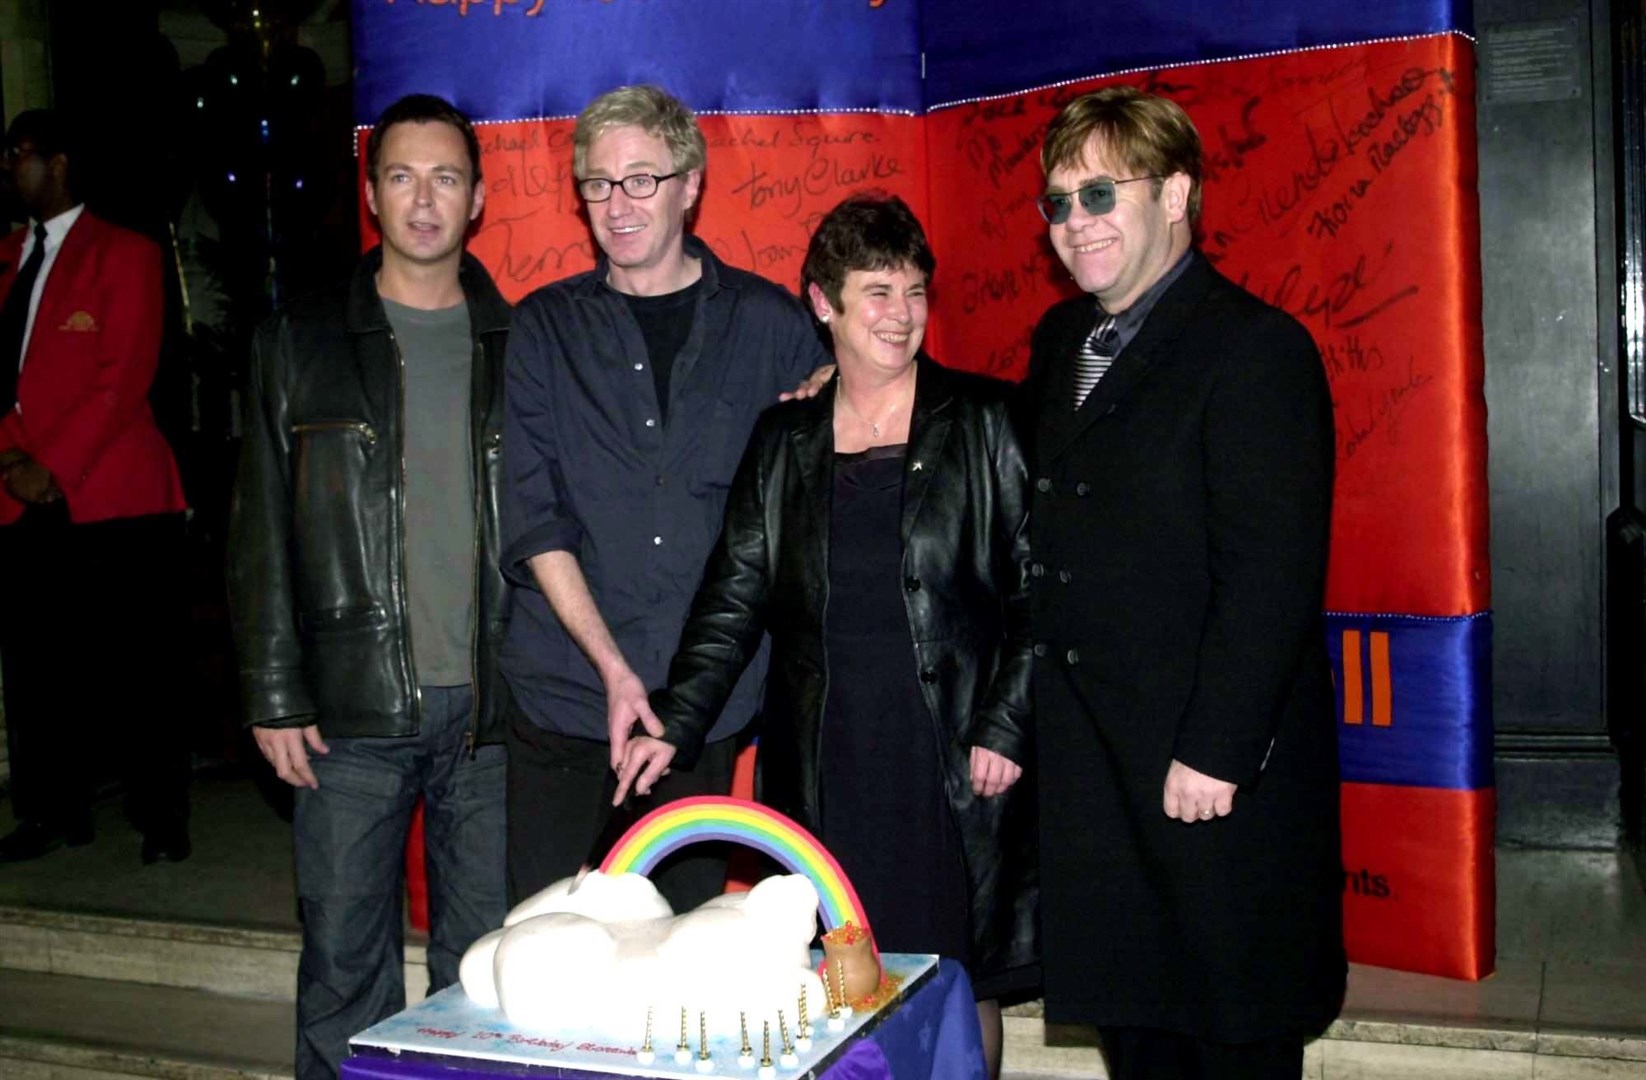 Cutting a cake to mark Stonewall’s 10th birthday with, from left, Julian Clary, Angela Mason and Sir Elton John in 1999 (PA)